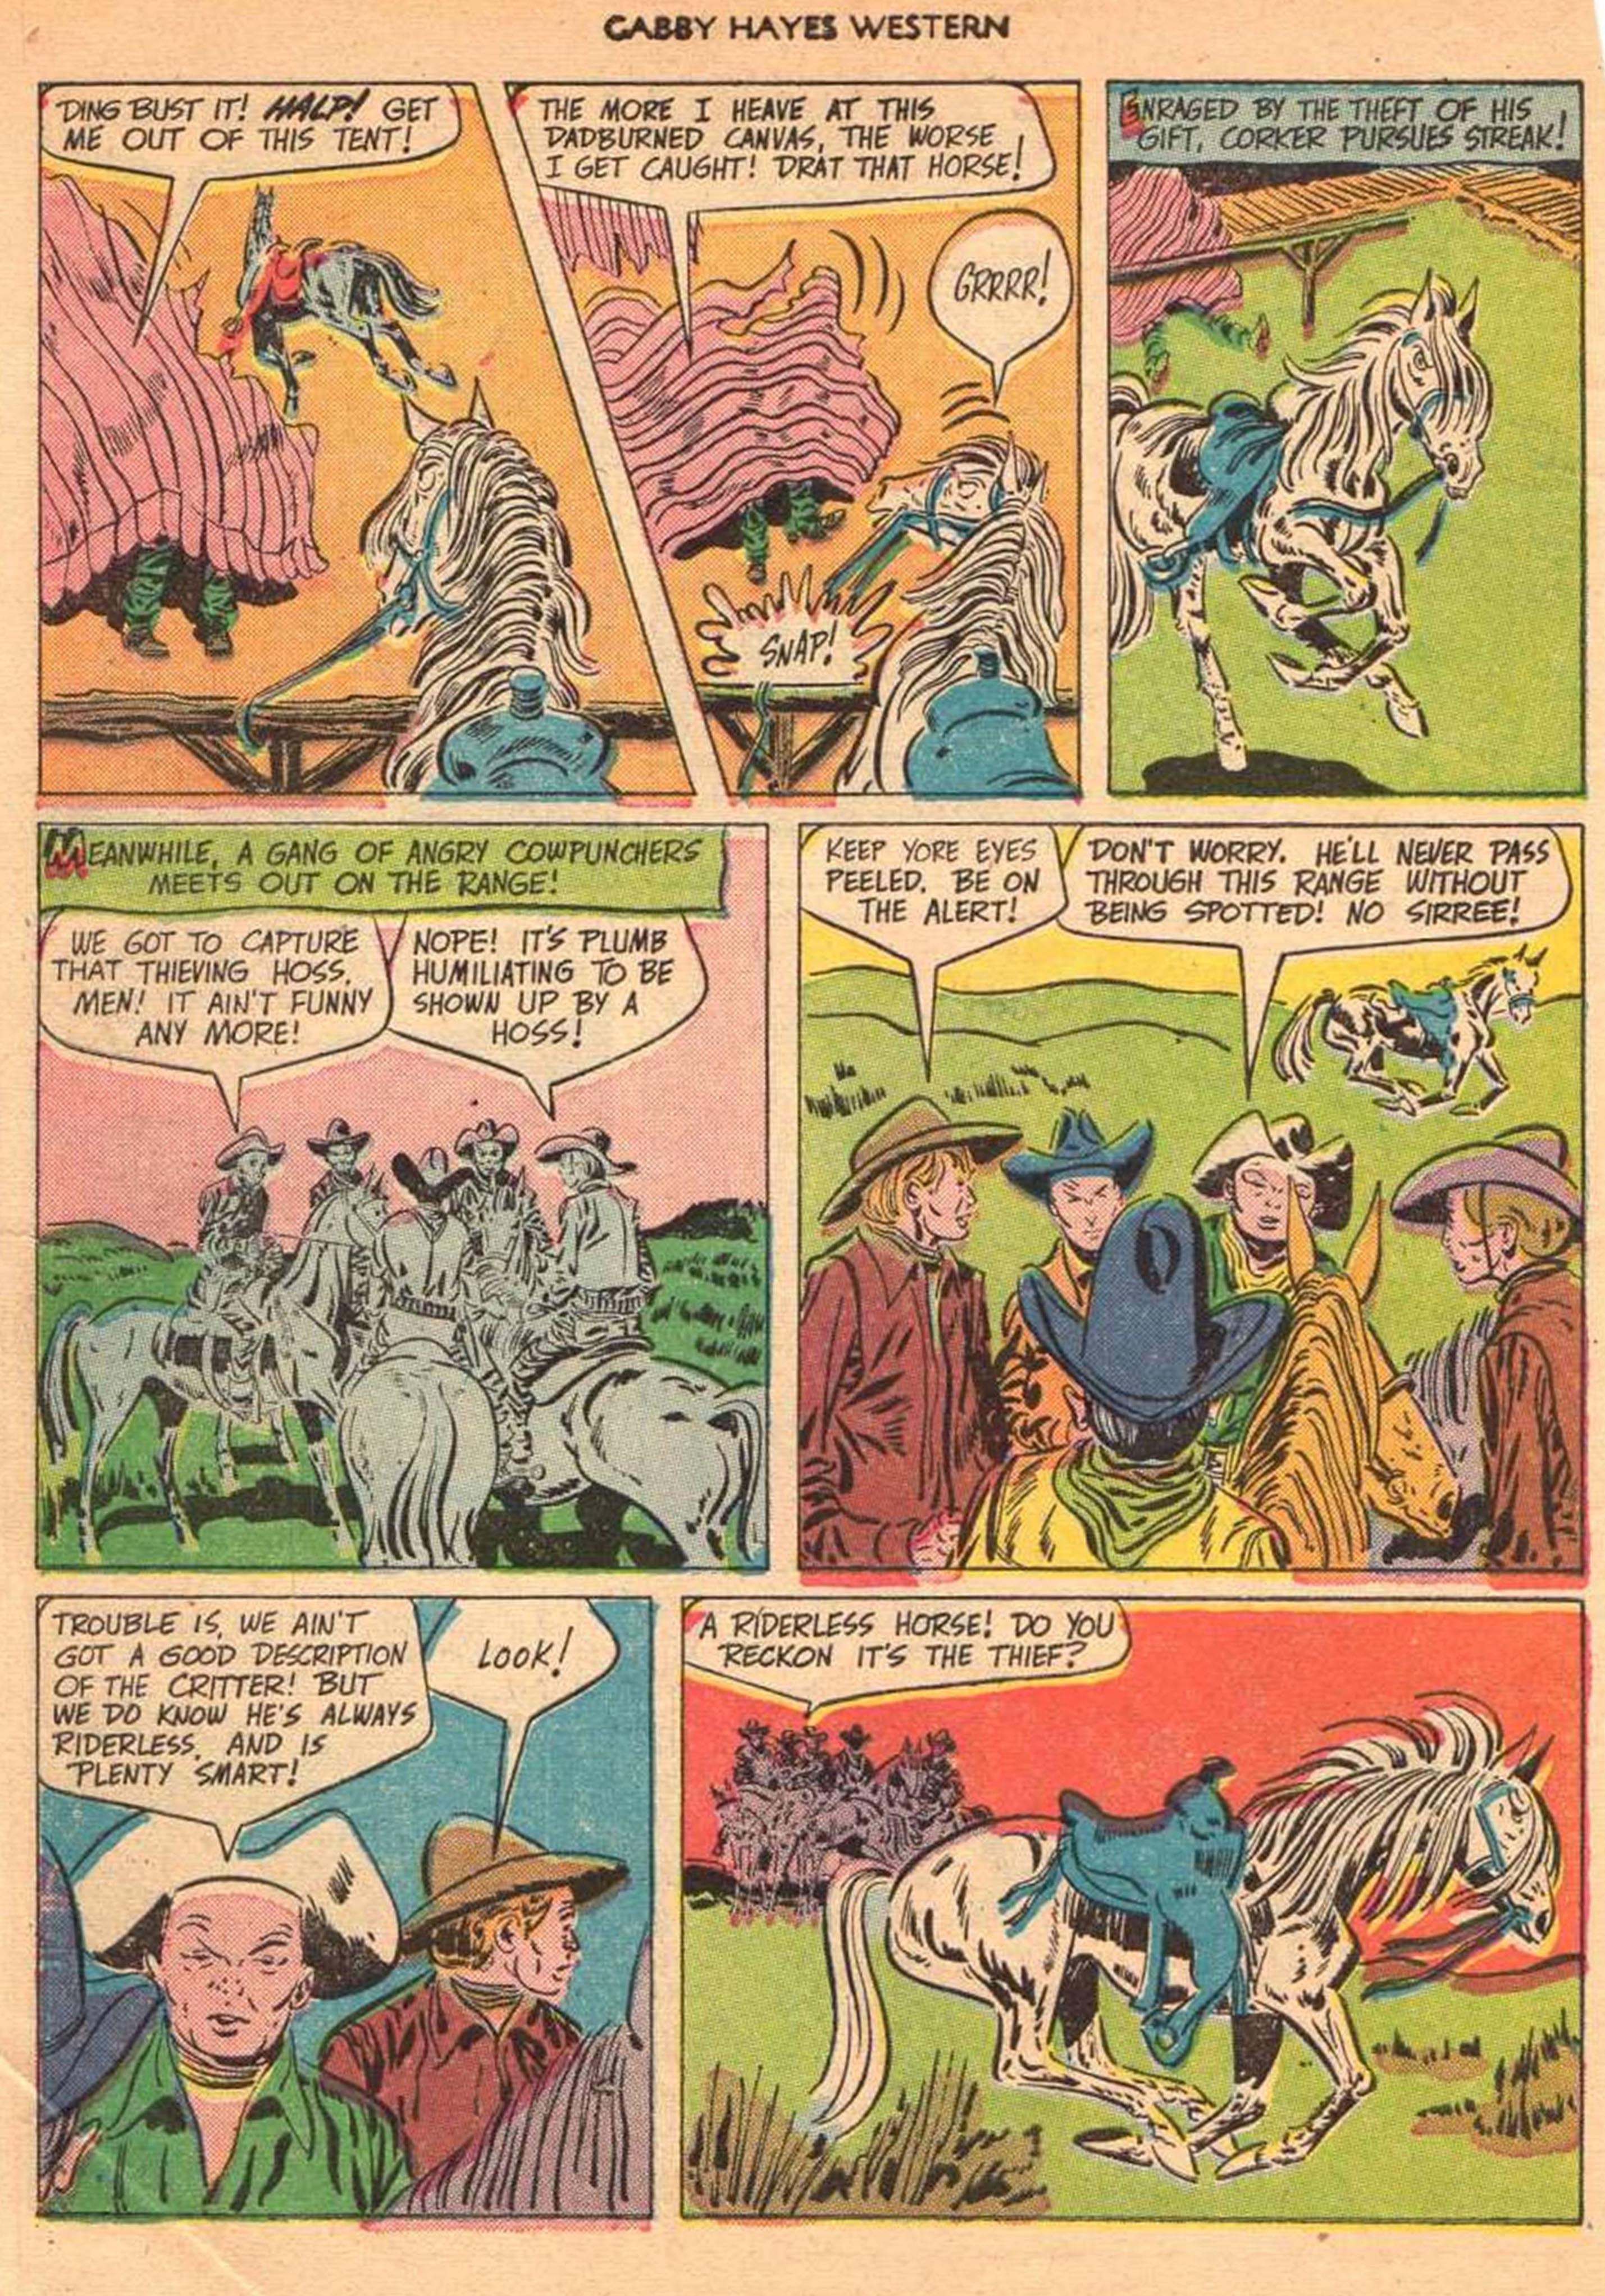 Read online Gabby Hayes Western comic -  Issue #24 - 6